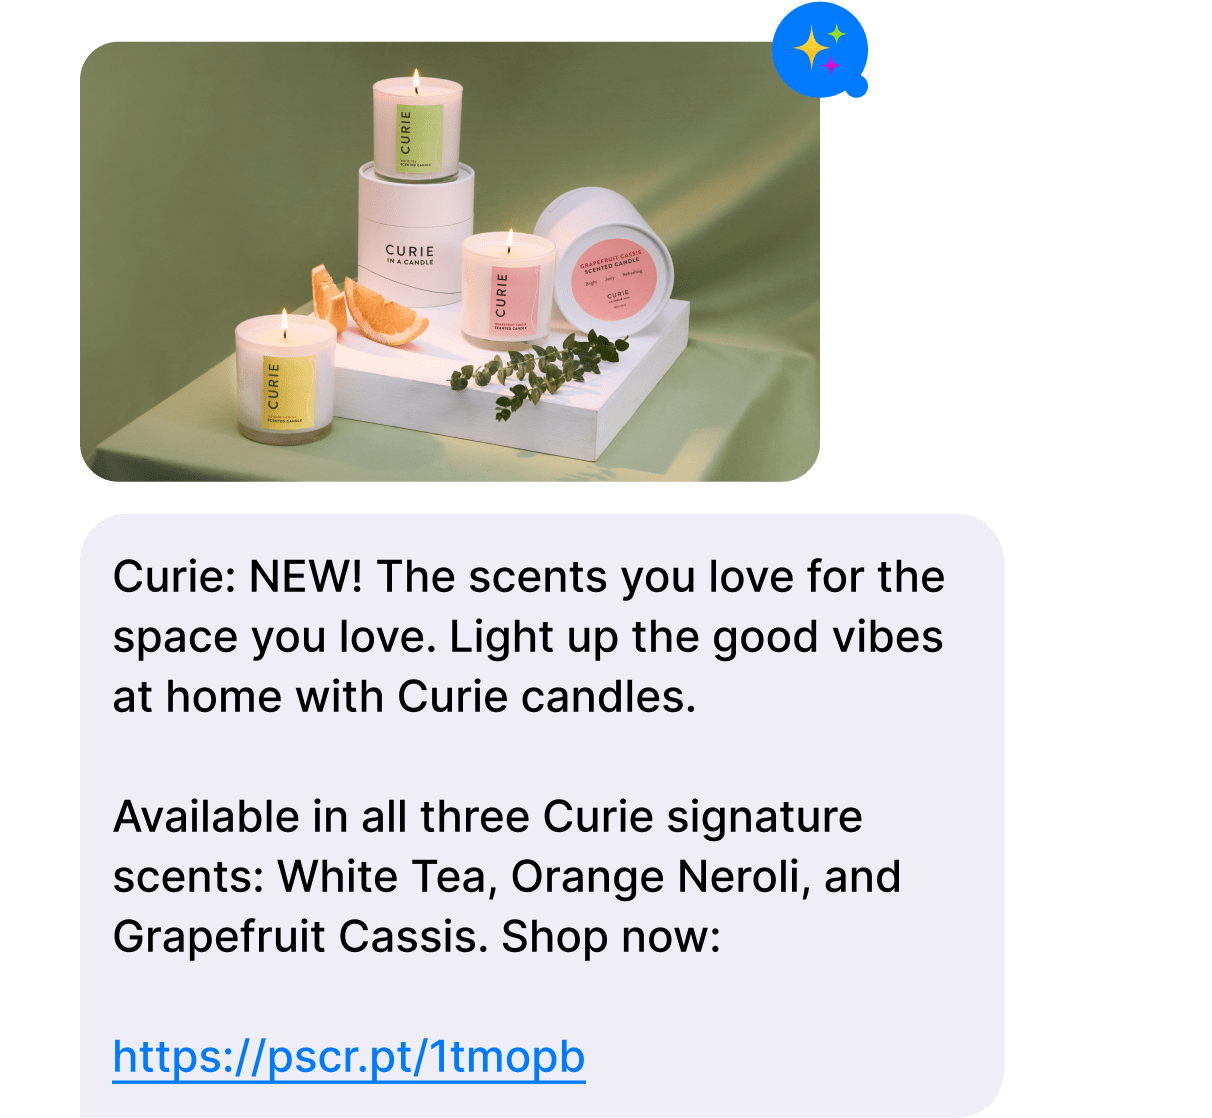 Curie Candles